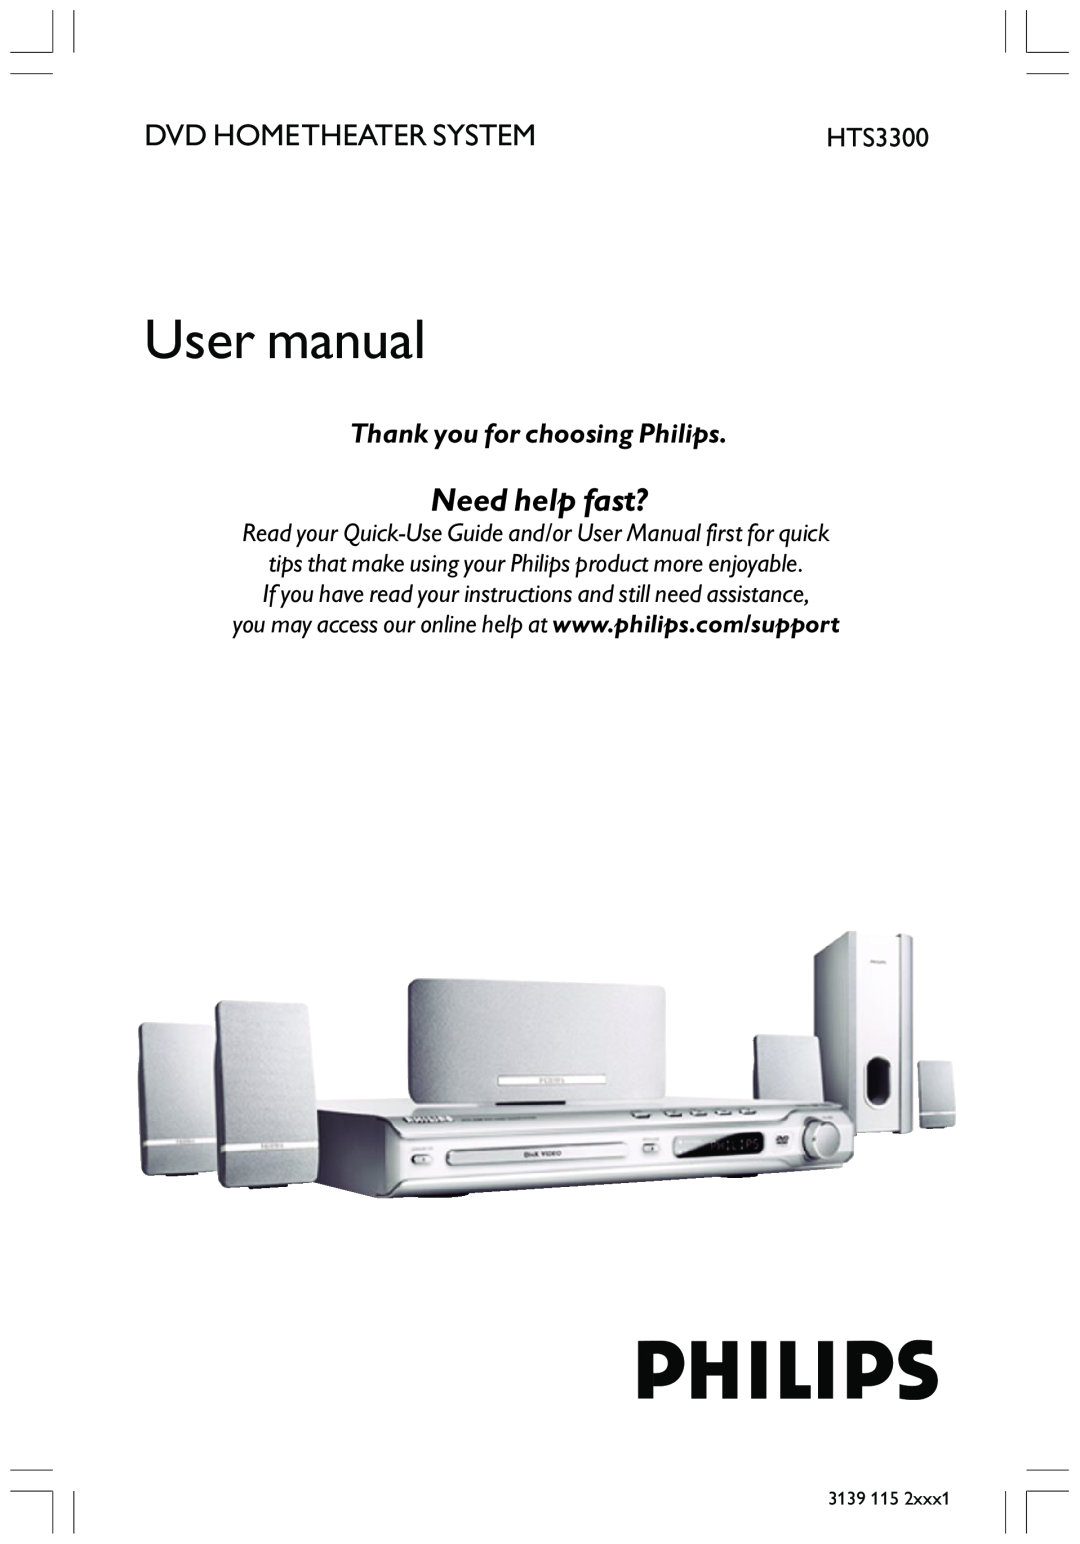 Philips HTS3300 user manual Thank you for choosing Philips, Need help fast?, Dvd Hometheater System 